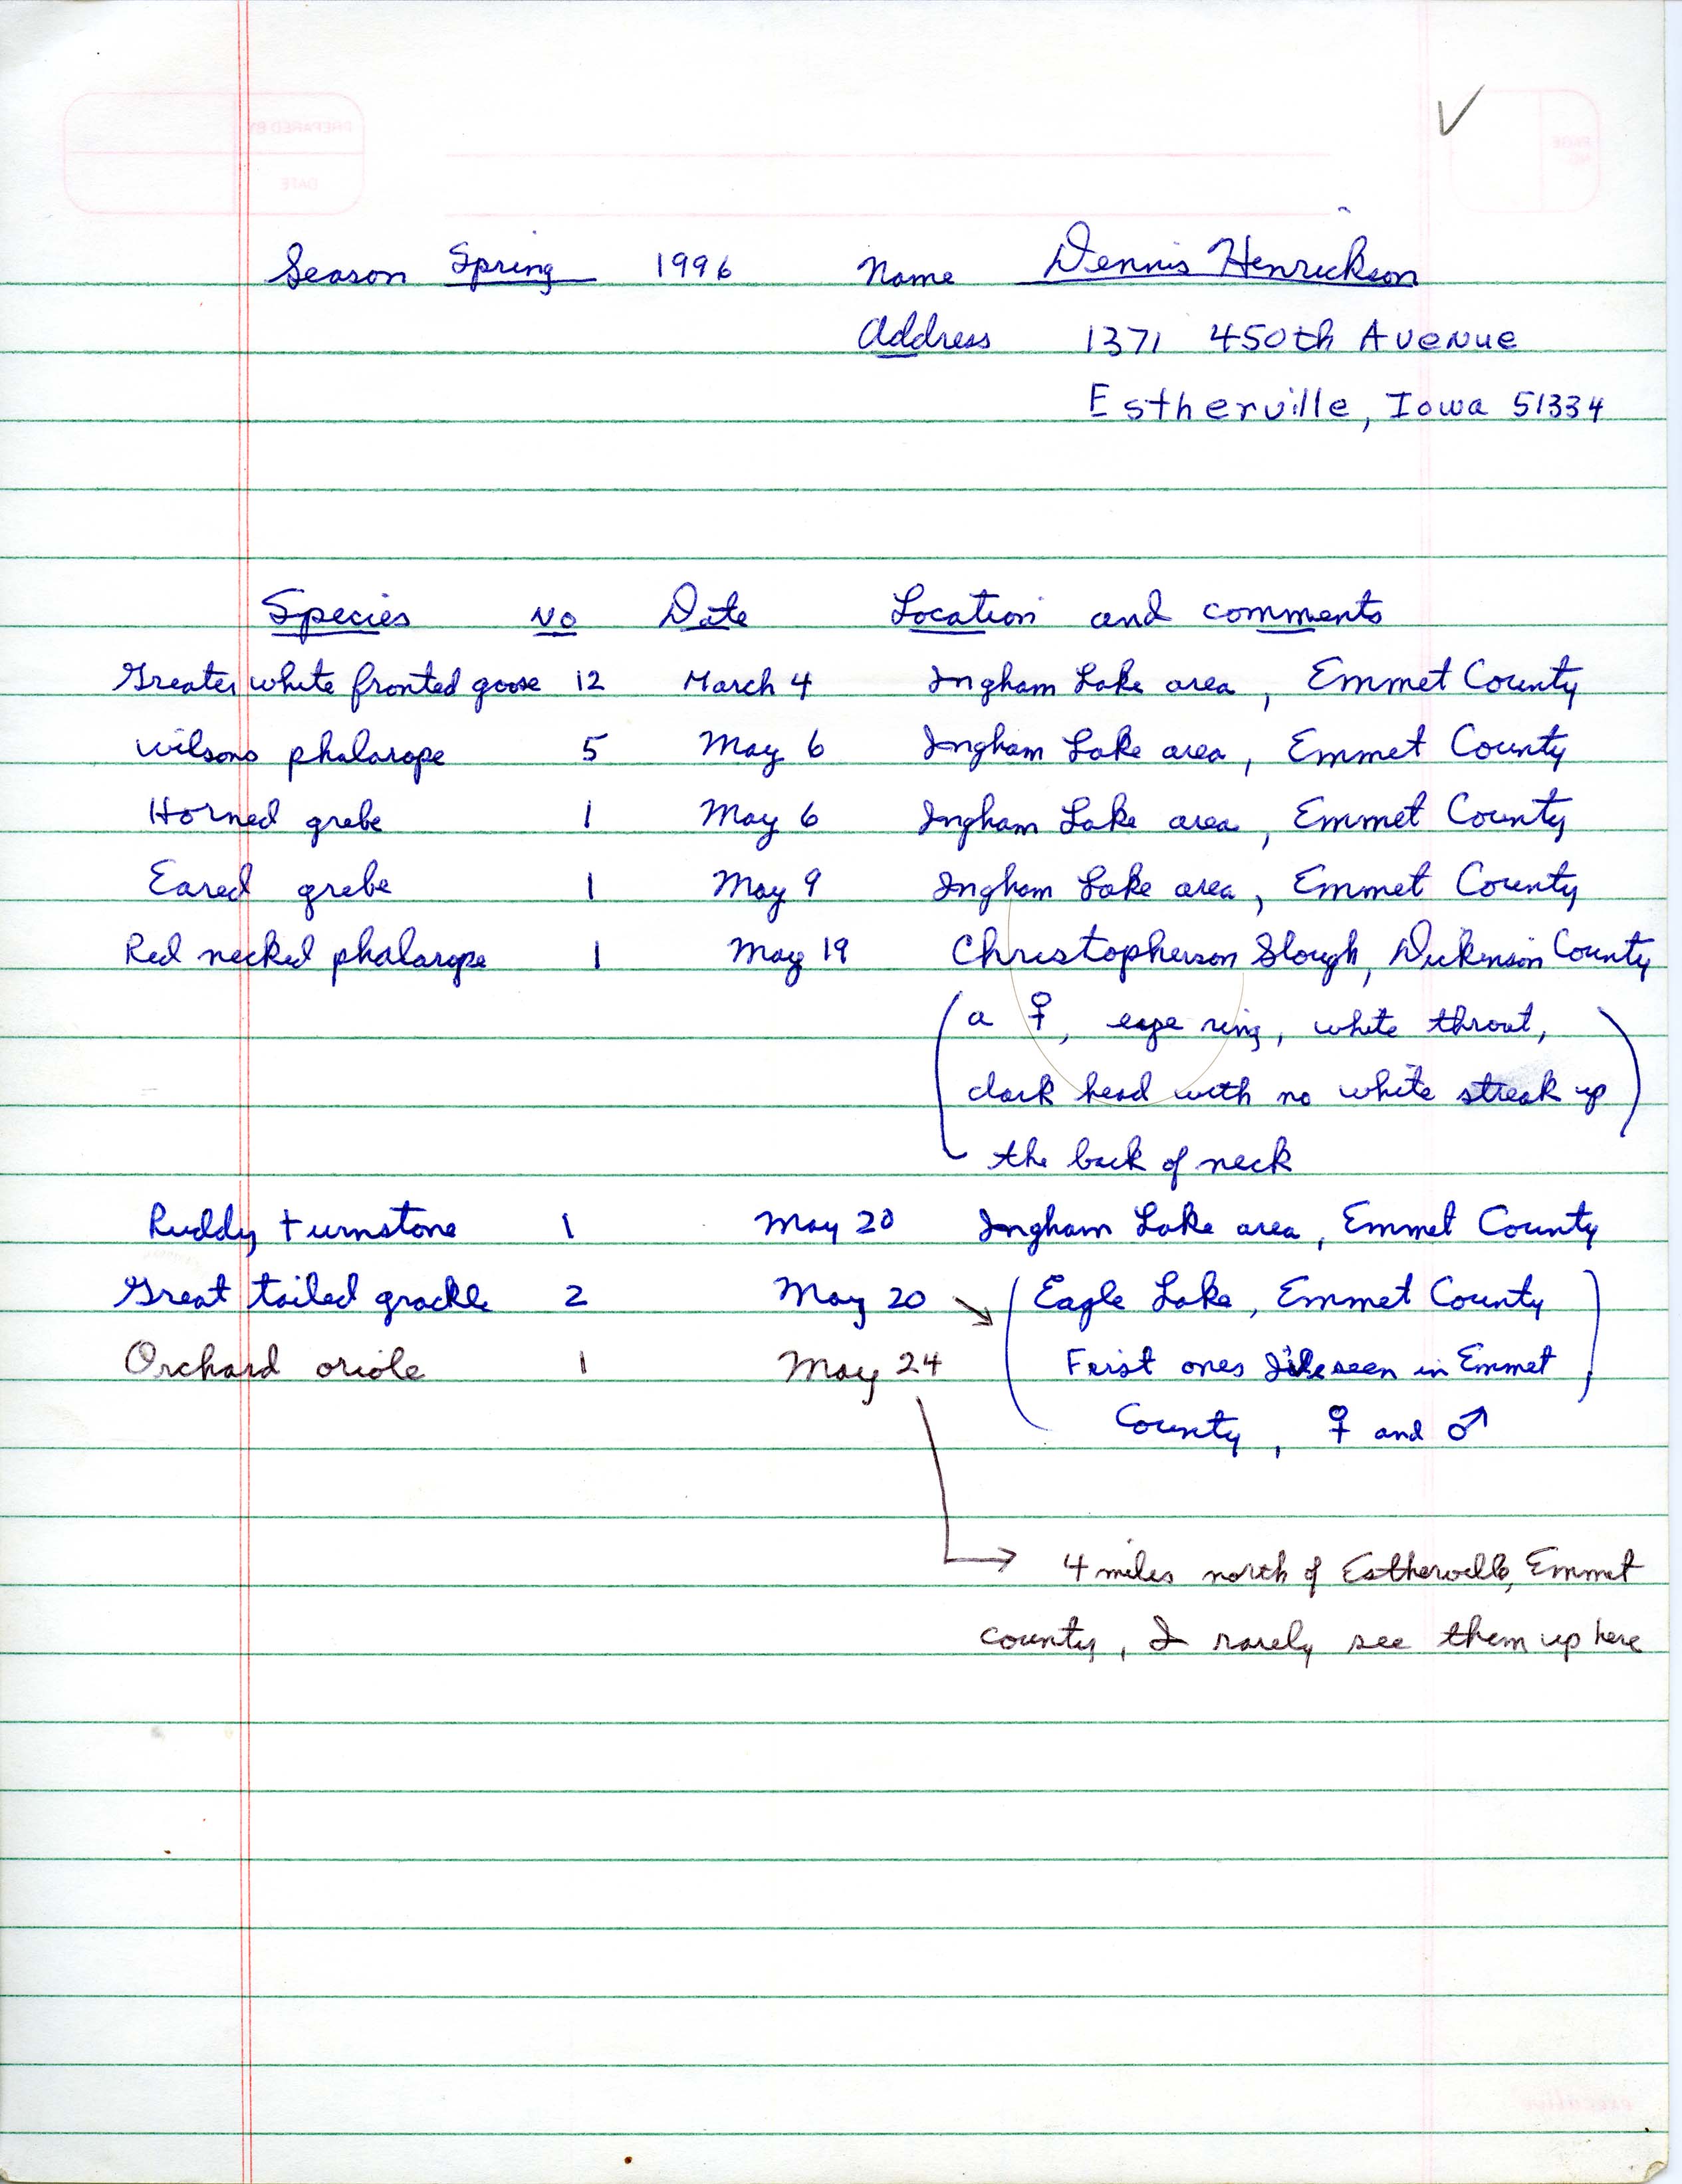 Field  notes contributed by Dennis Henrickson, spring 1996